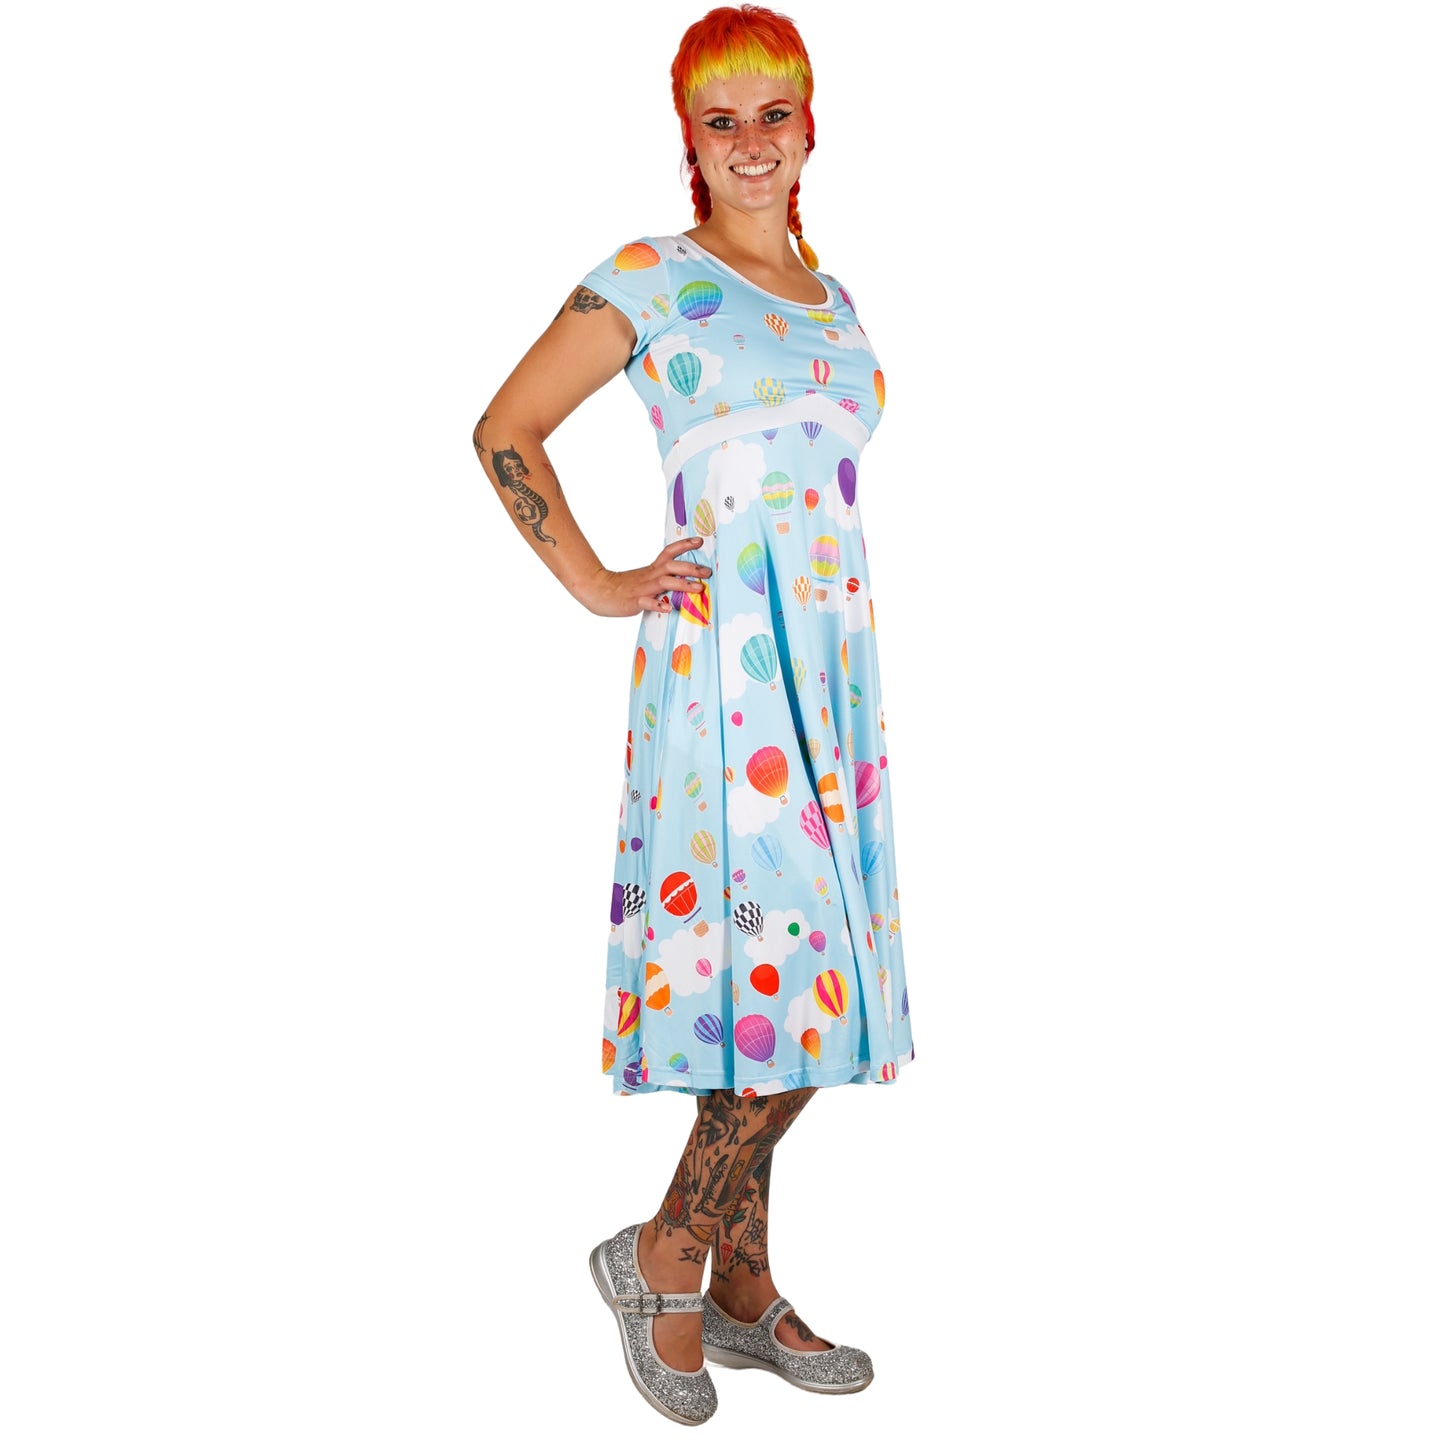 Whimsy Tea Dress by RainbowsAndFairies.com (Balloons - Hot Air Balloon - Dress With Pockets - Rockabilly - Vintage Inspired) - SKU: CL_TEADR_WHIMS_ORG - Pic 02